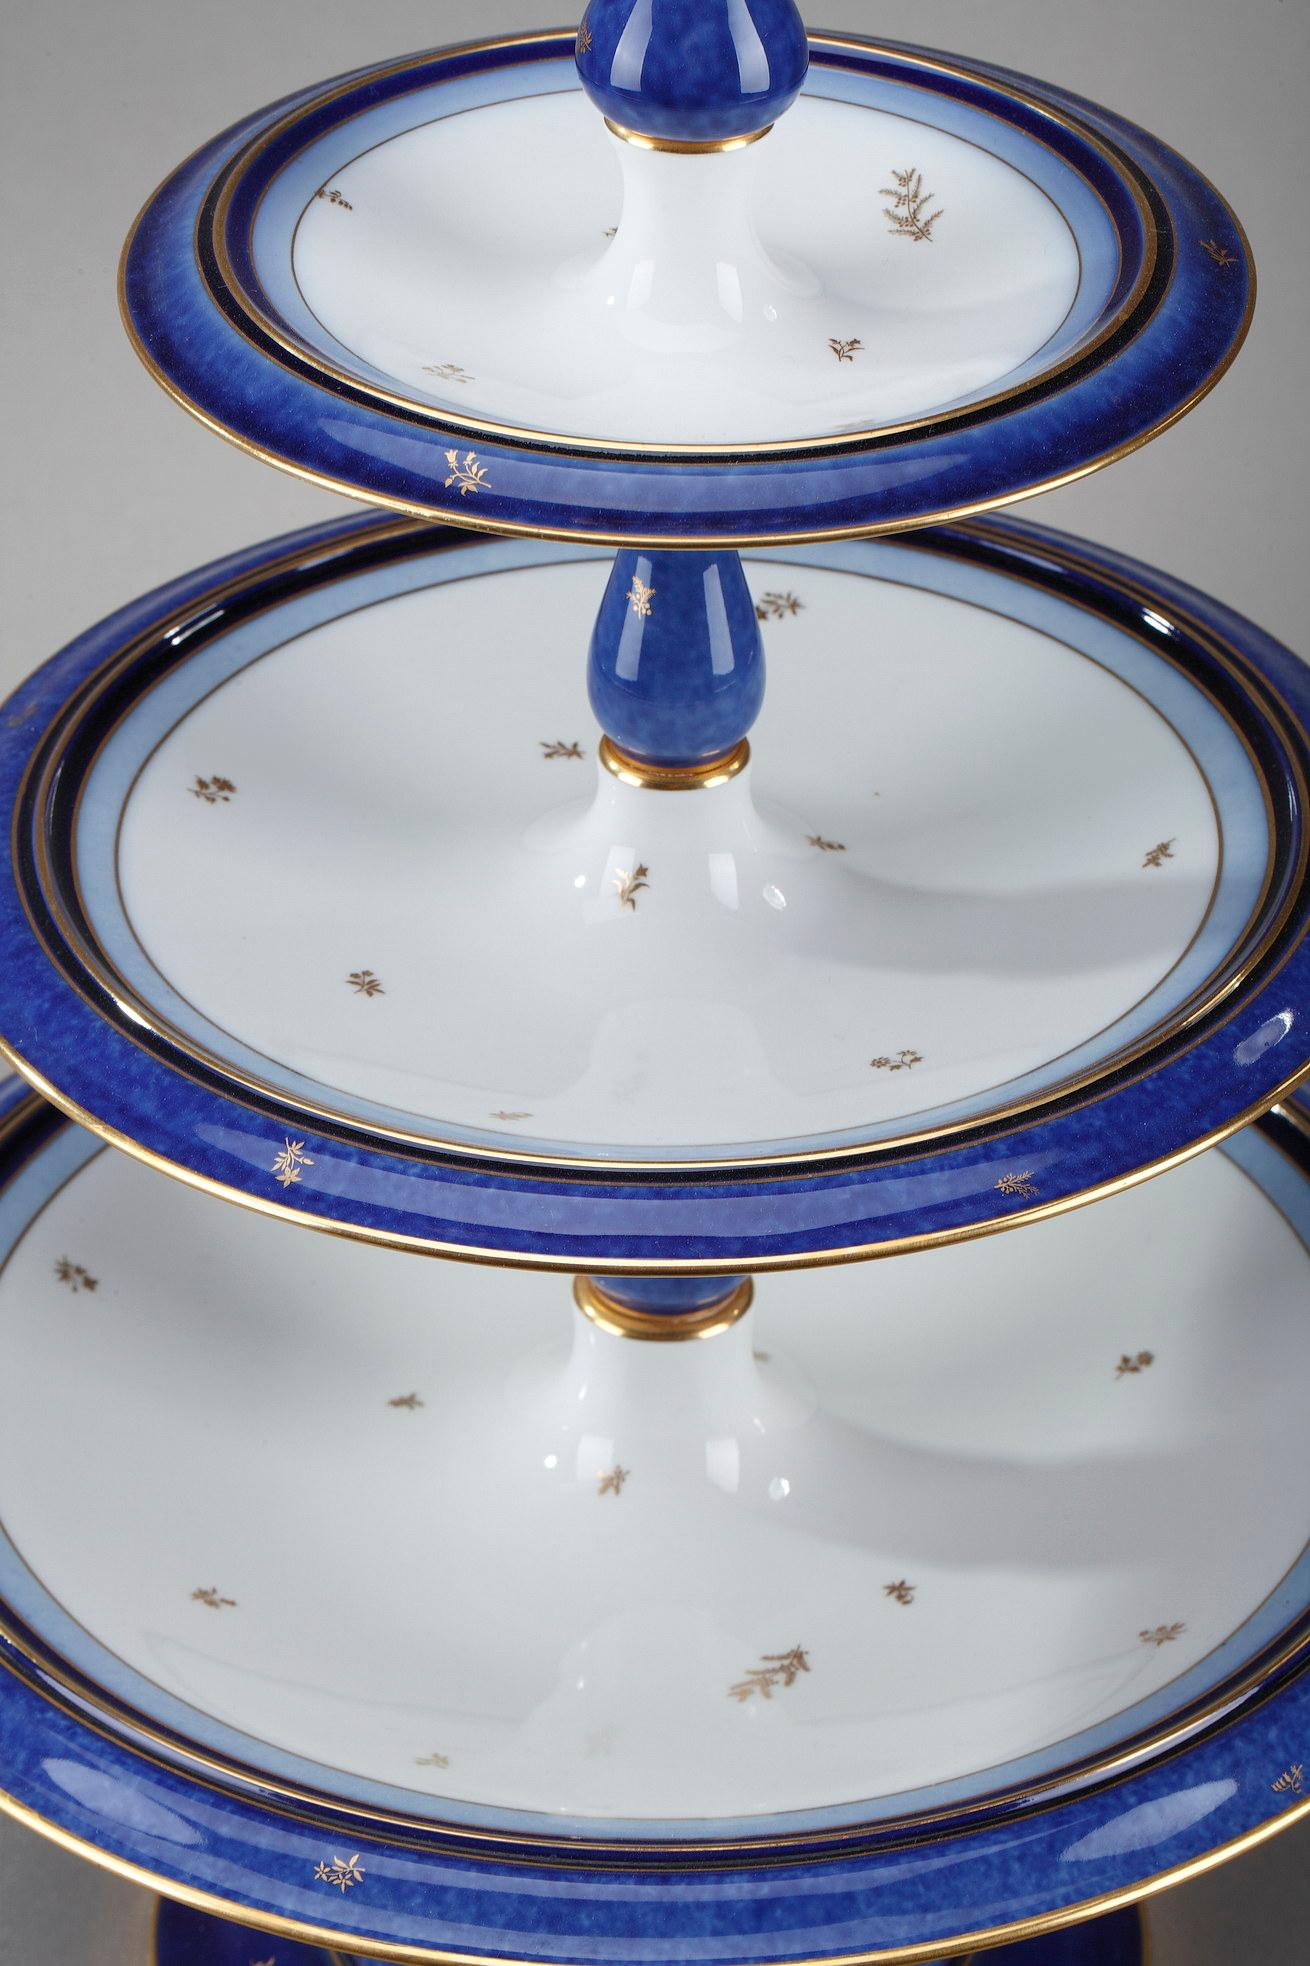 Mid-20th Century Sevres Blue and White Porcelain Cake Stand